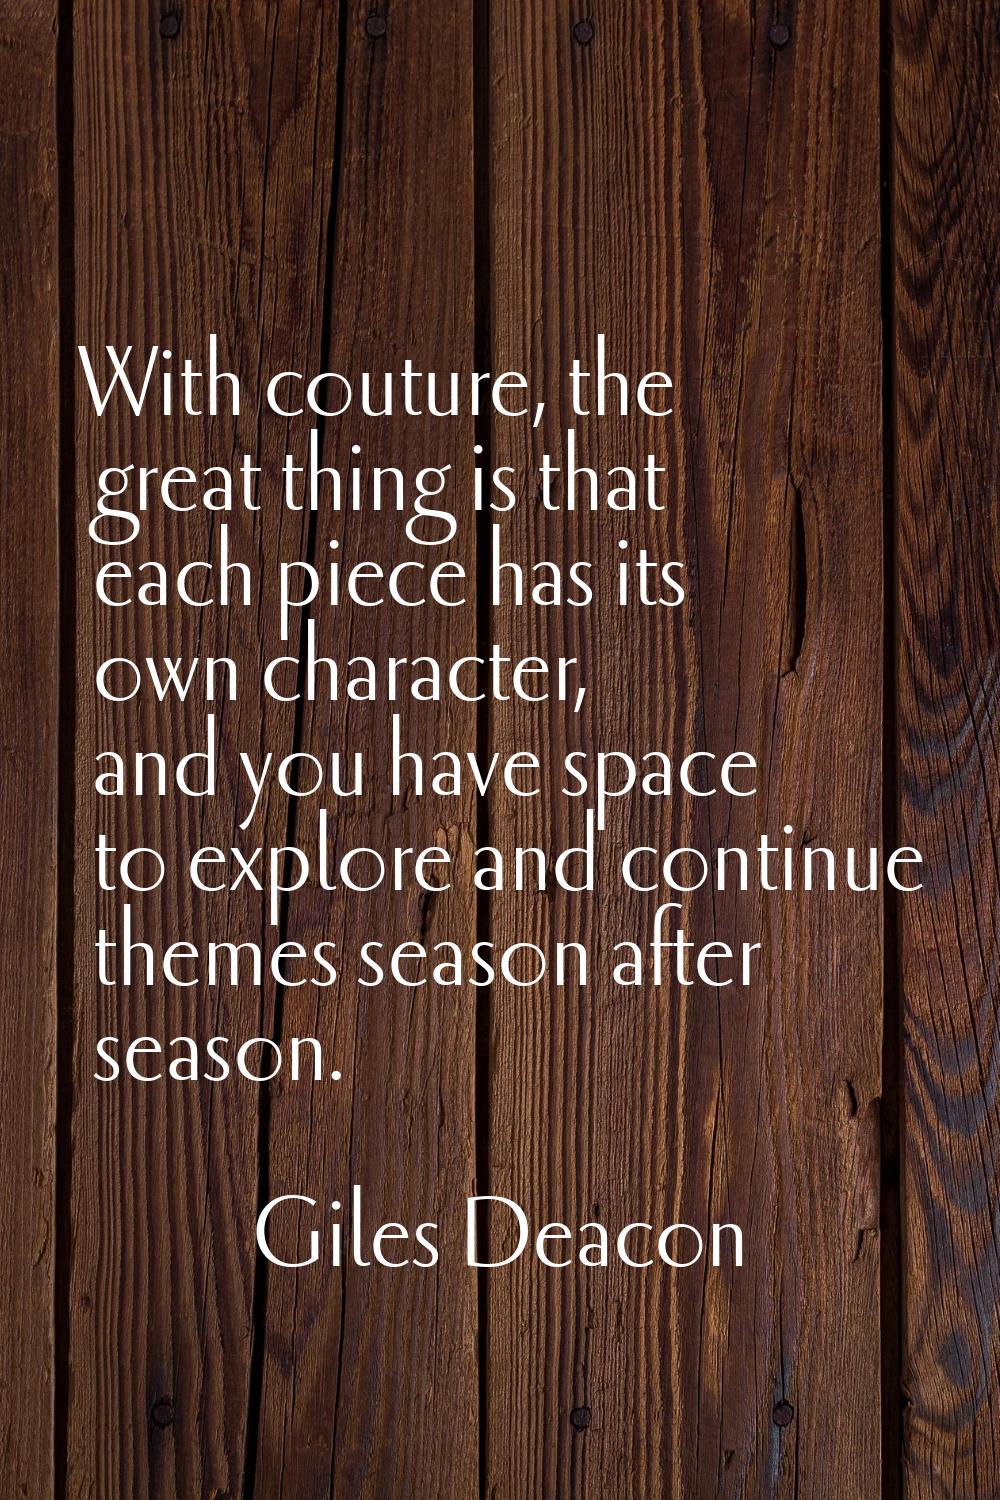 With couture, the great thing is that each piece has its own character, and you have space to explo